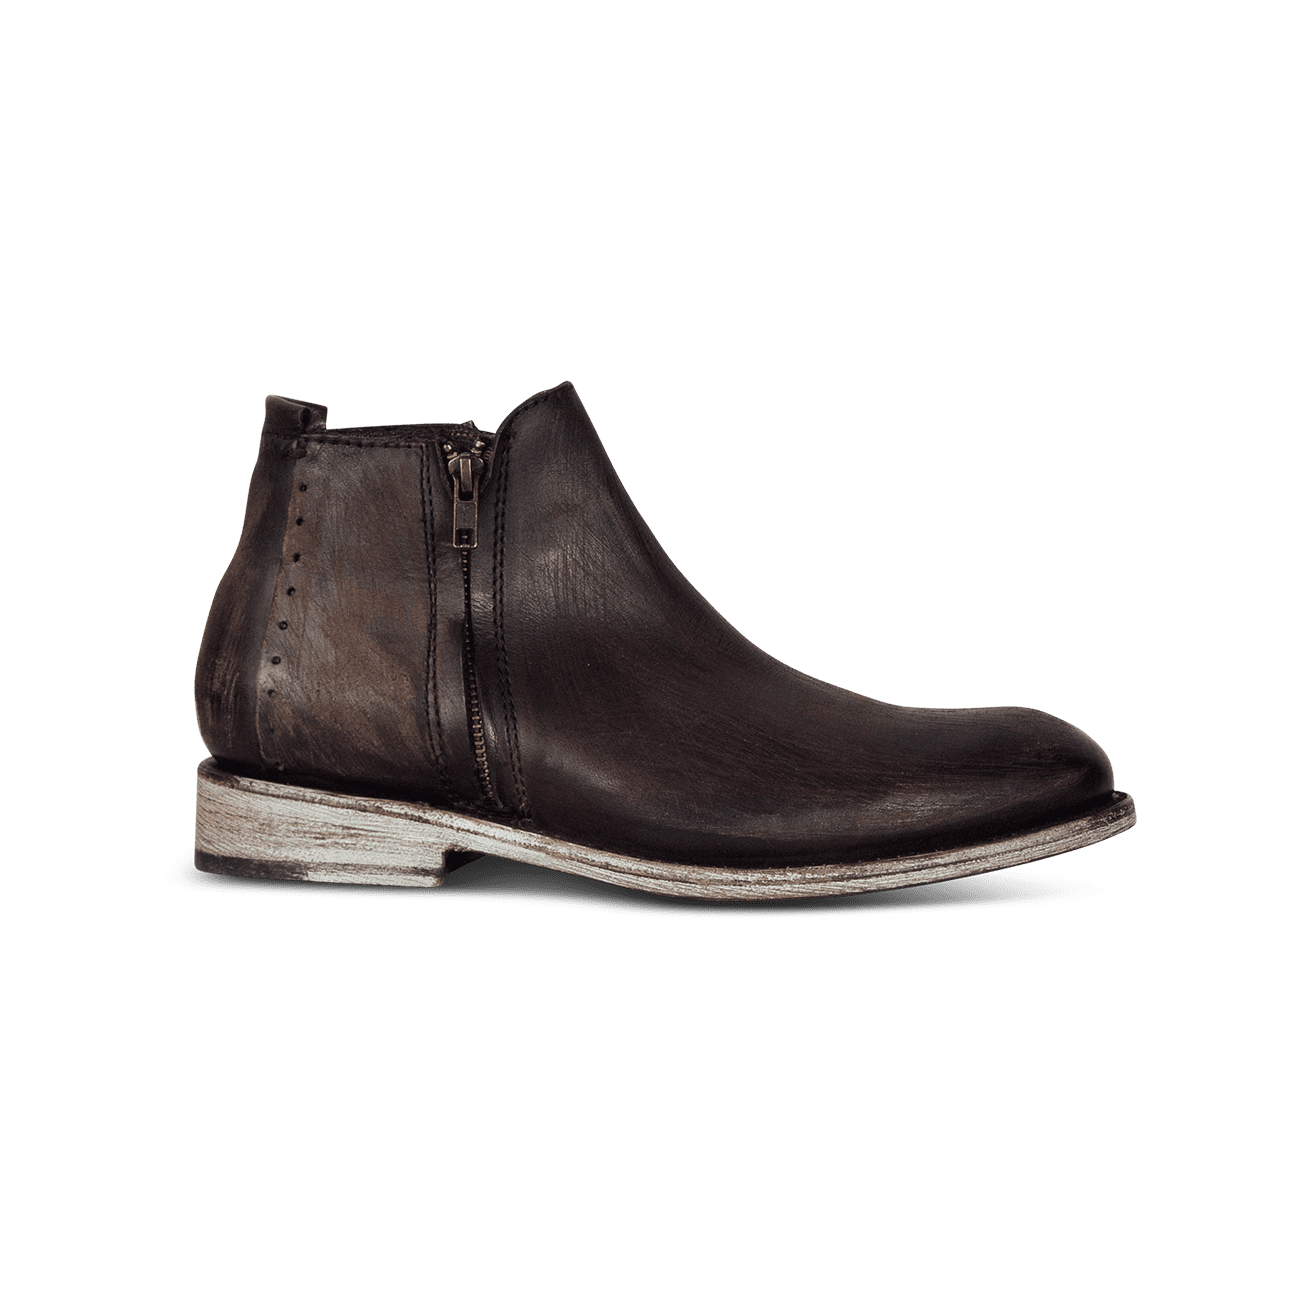 FREEBIRD men's Milo dark brown boot with an outside and inside zip closure detail